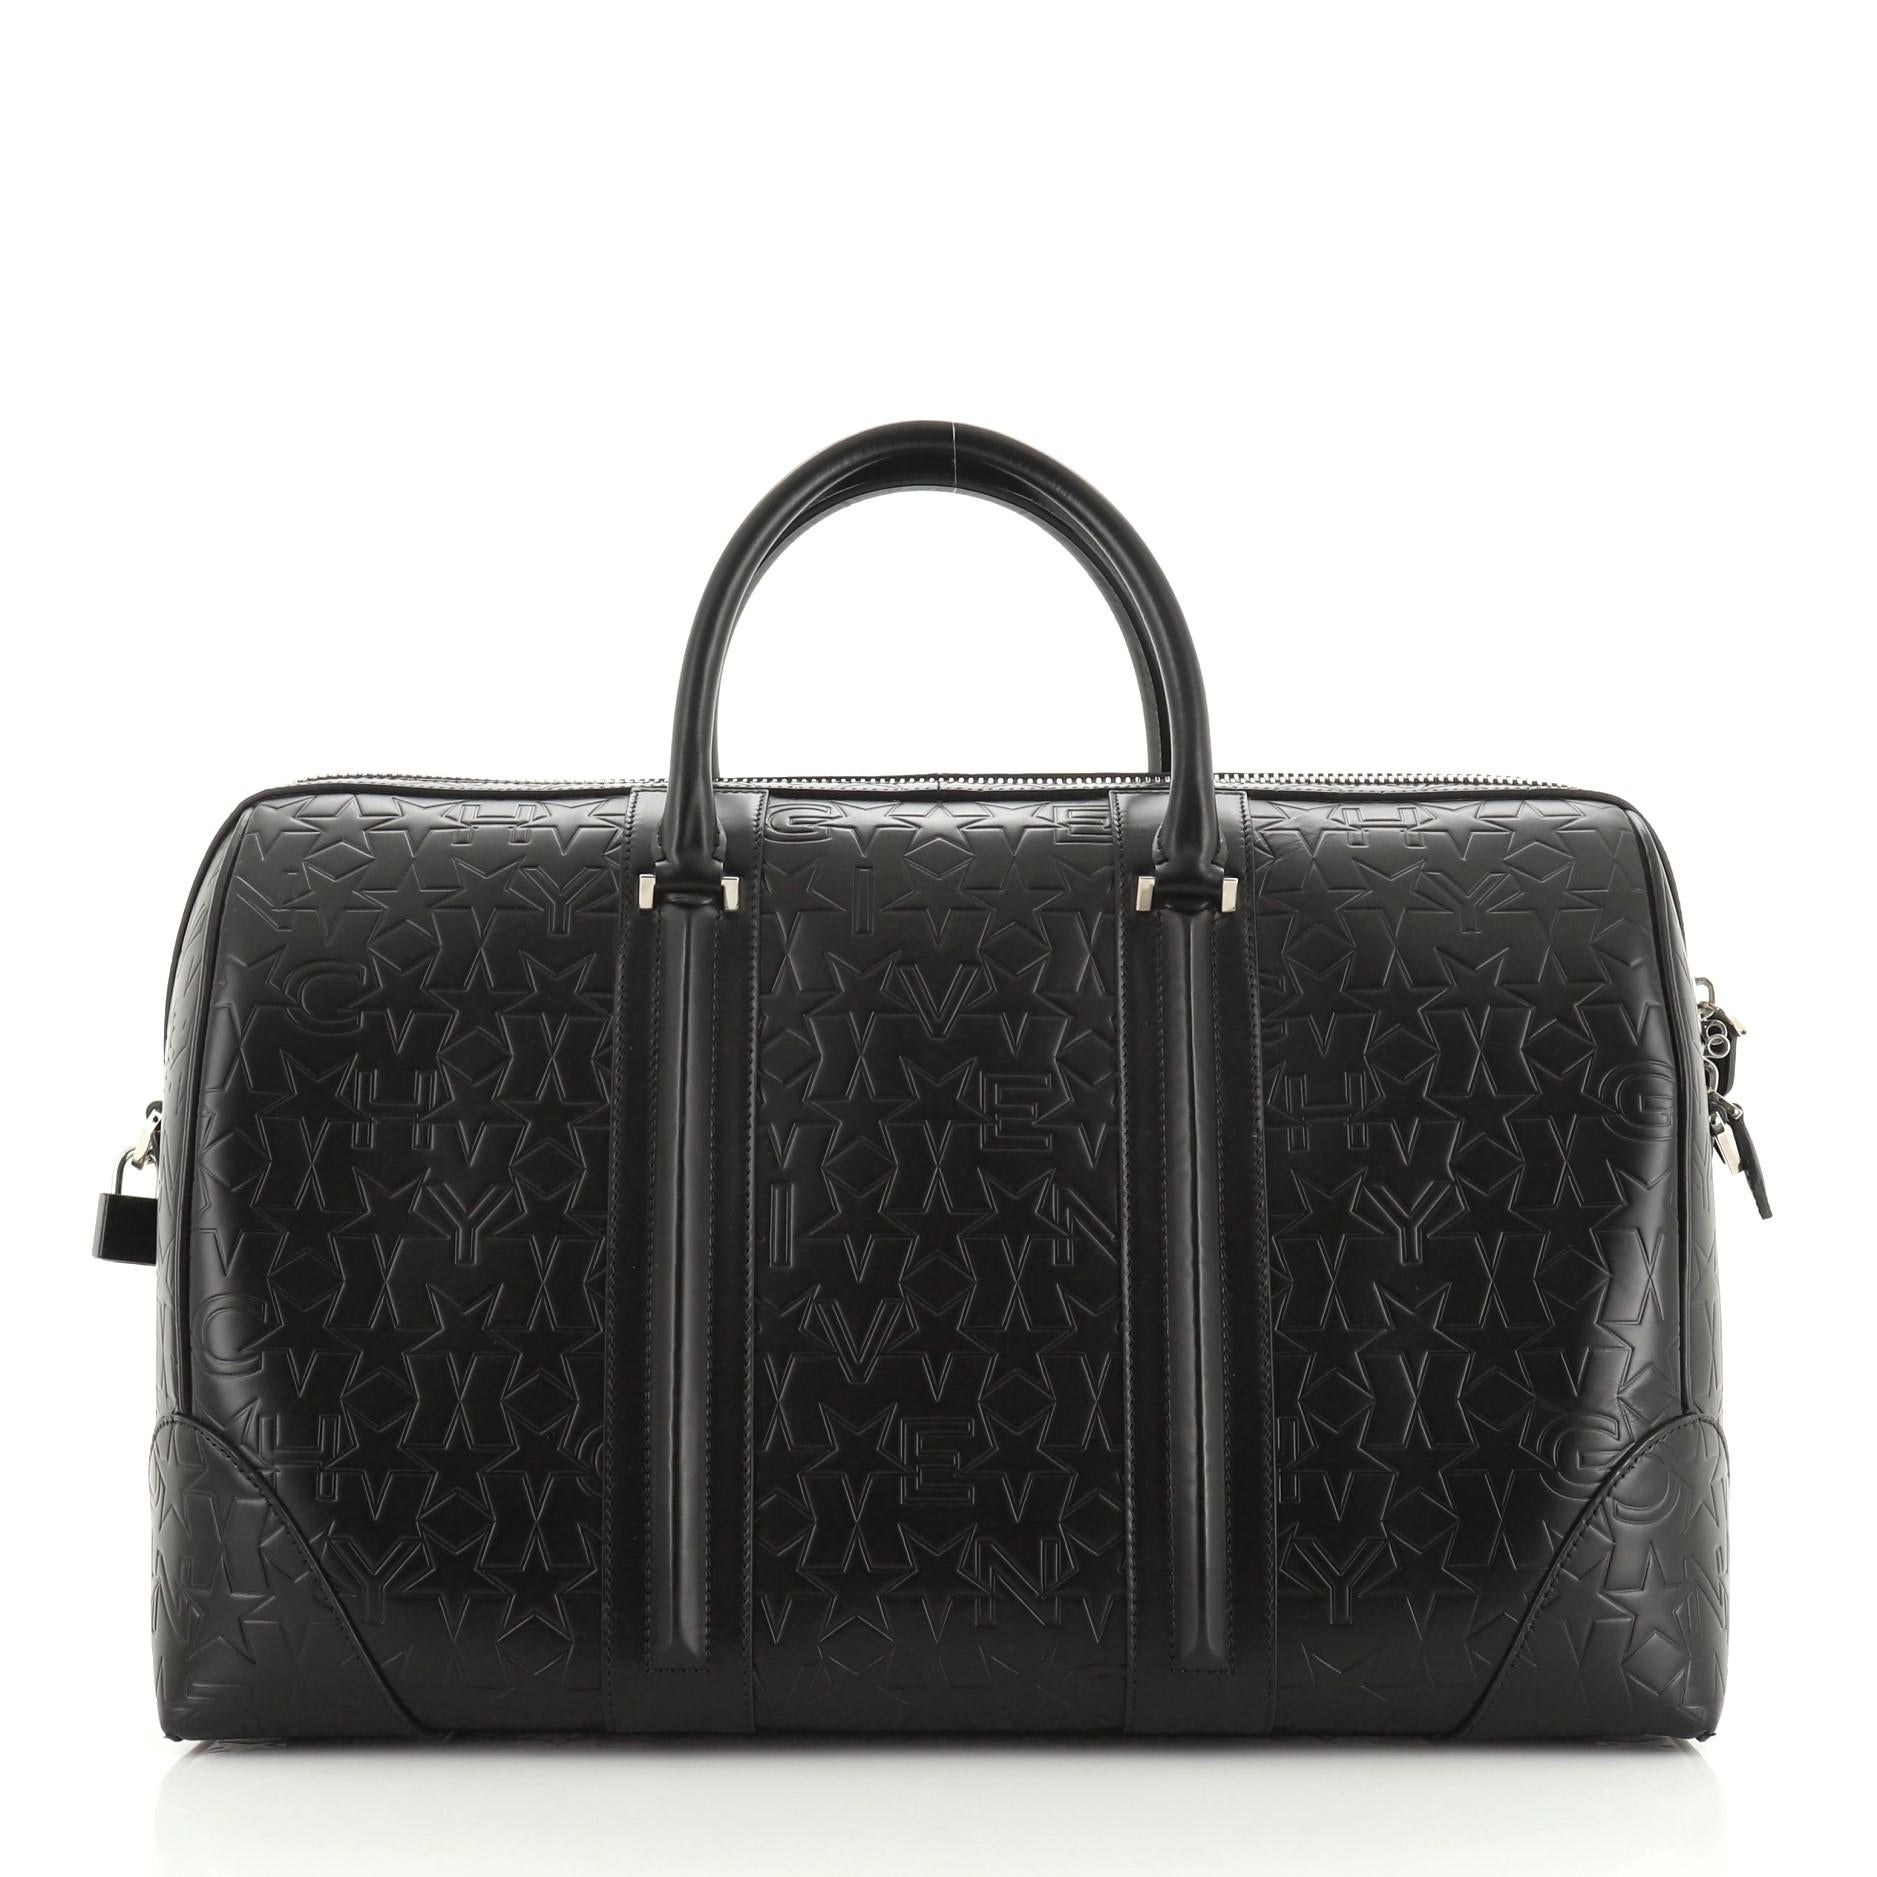 givenchy weekend bag